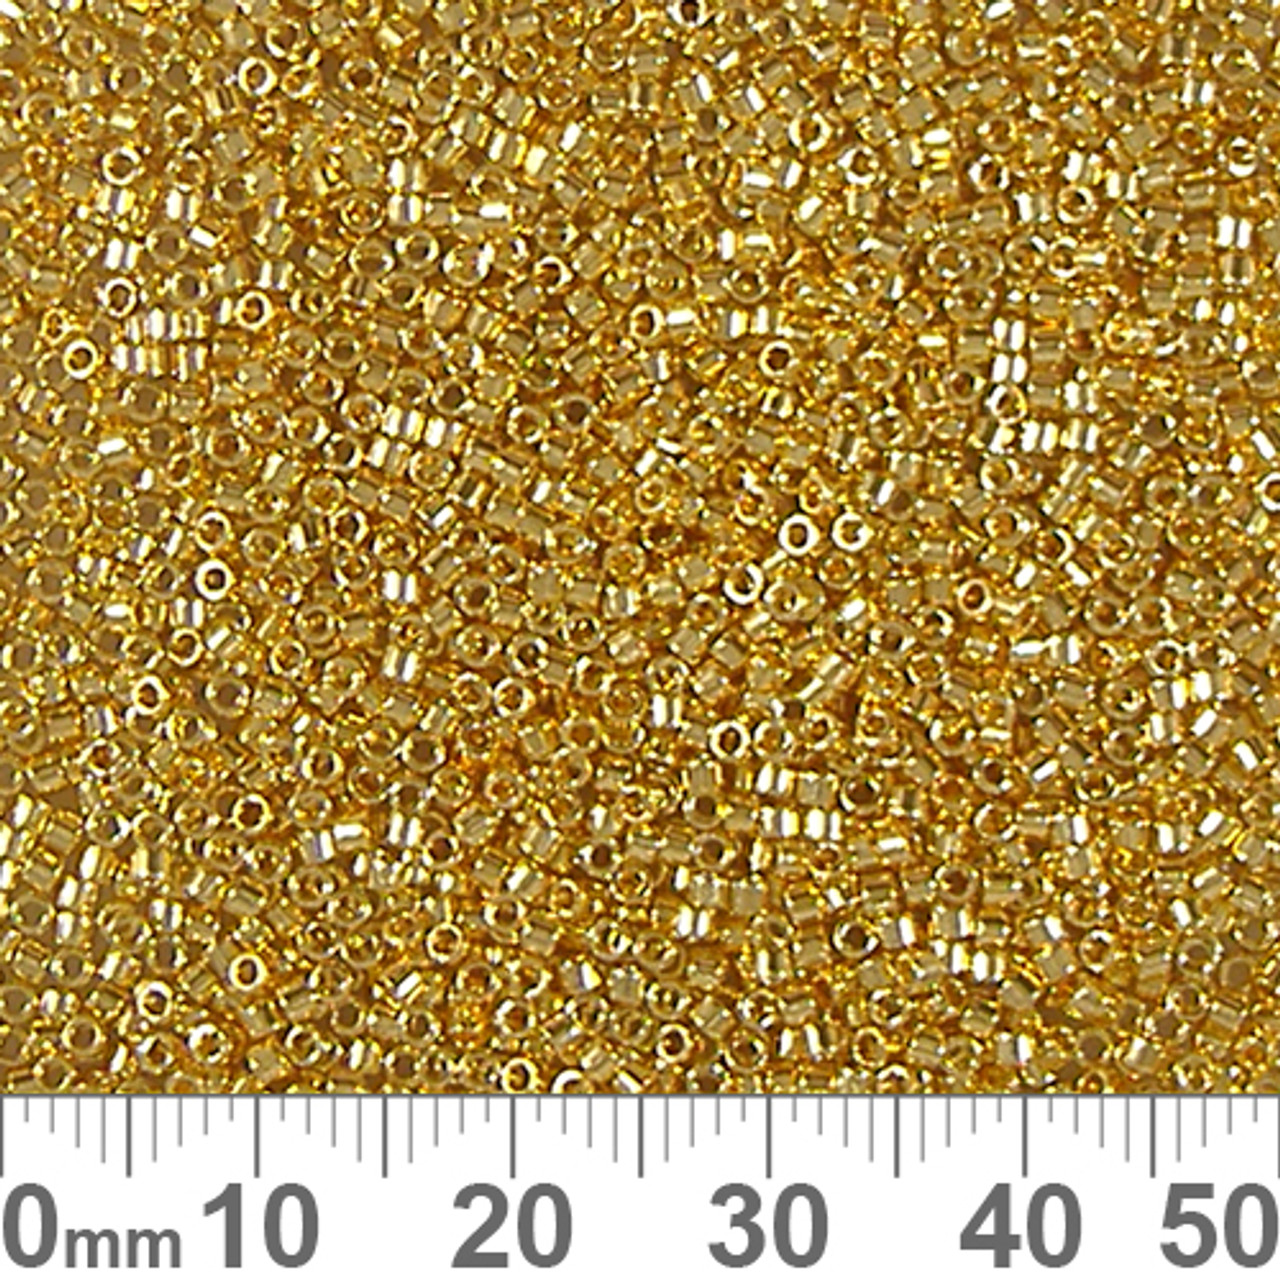 Golden Glass Seed Beads - Size 11/0